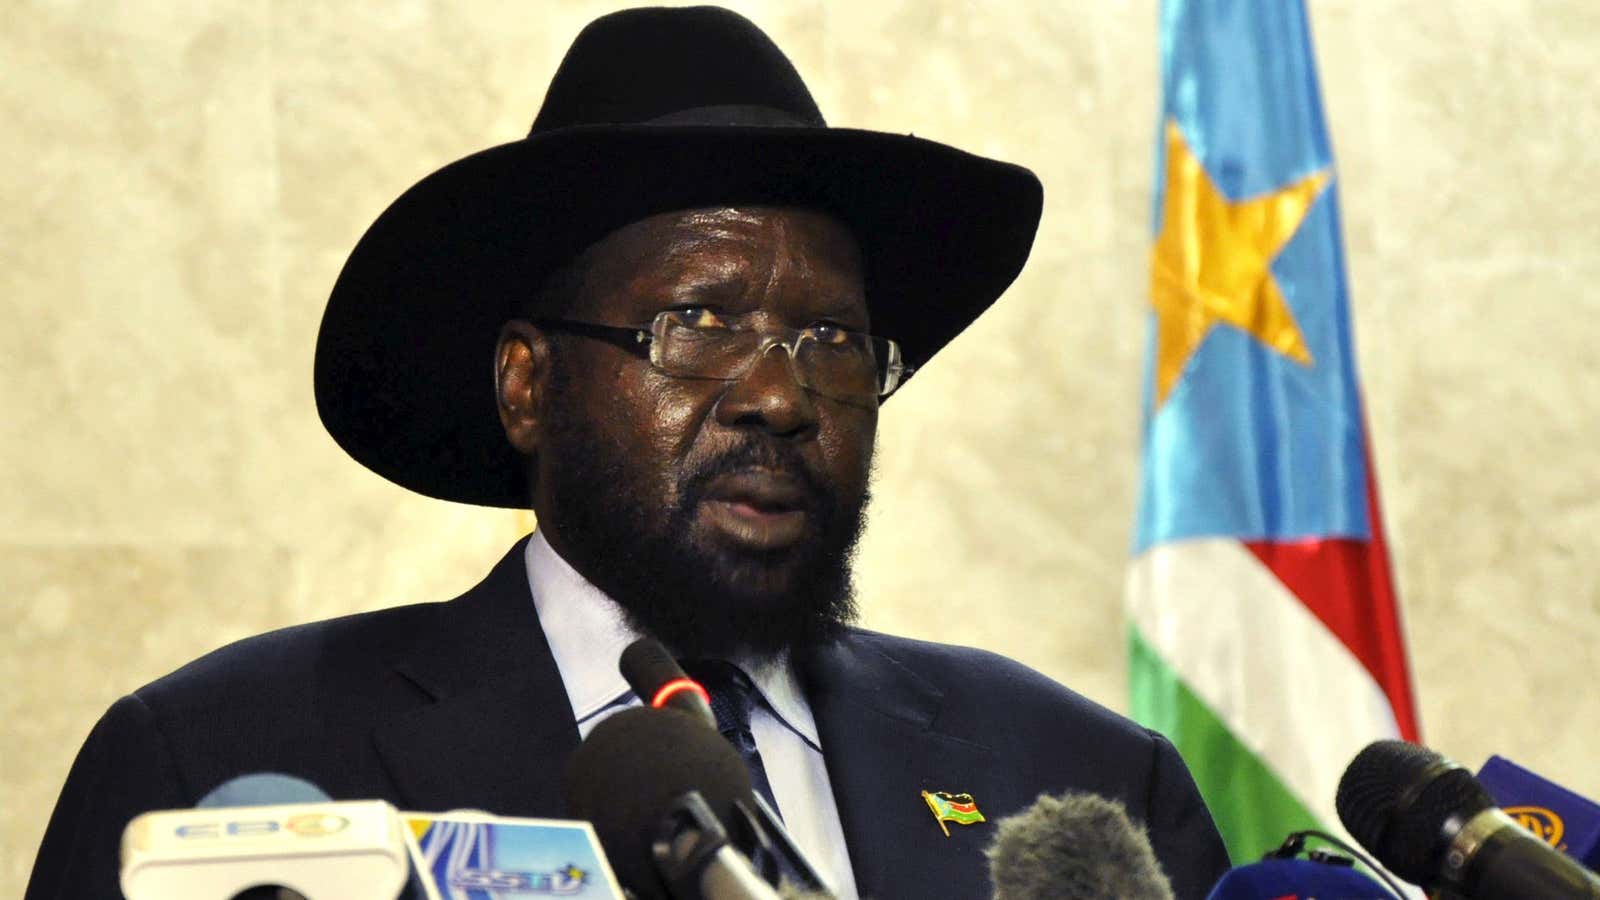 South Sudan’s President, Salva Kiir, has threatened to kill journalists who report “against the country.”